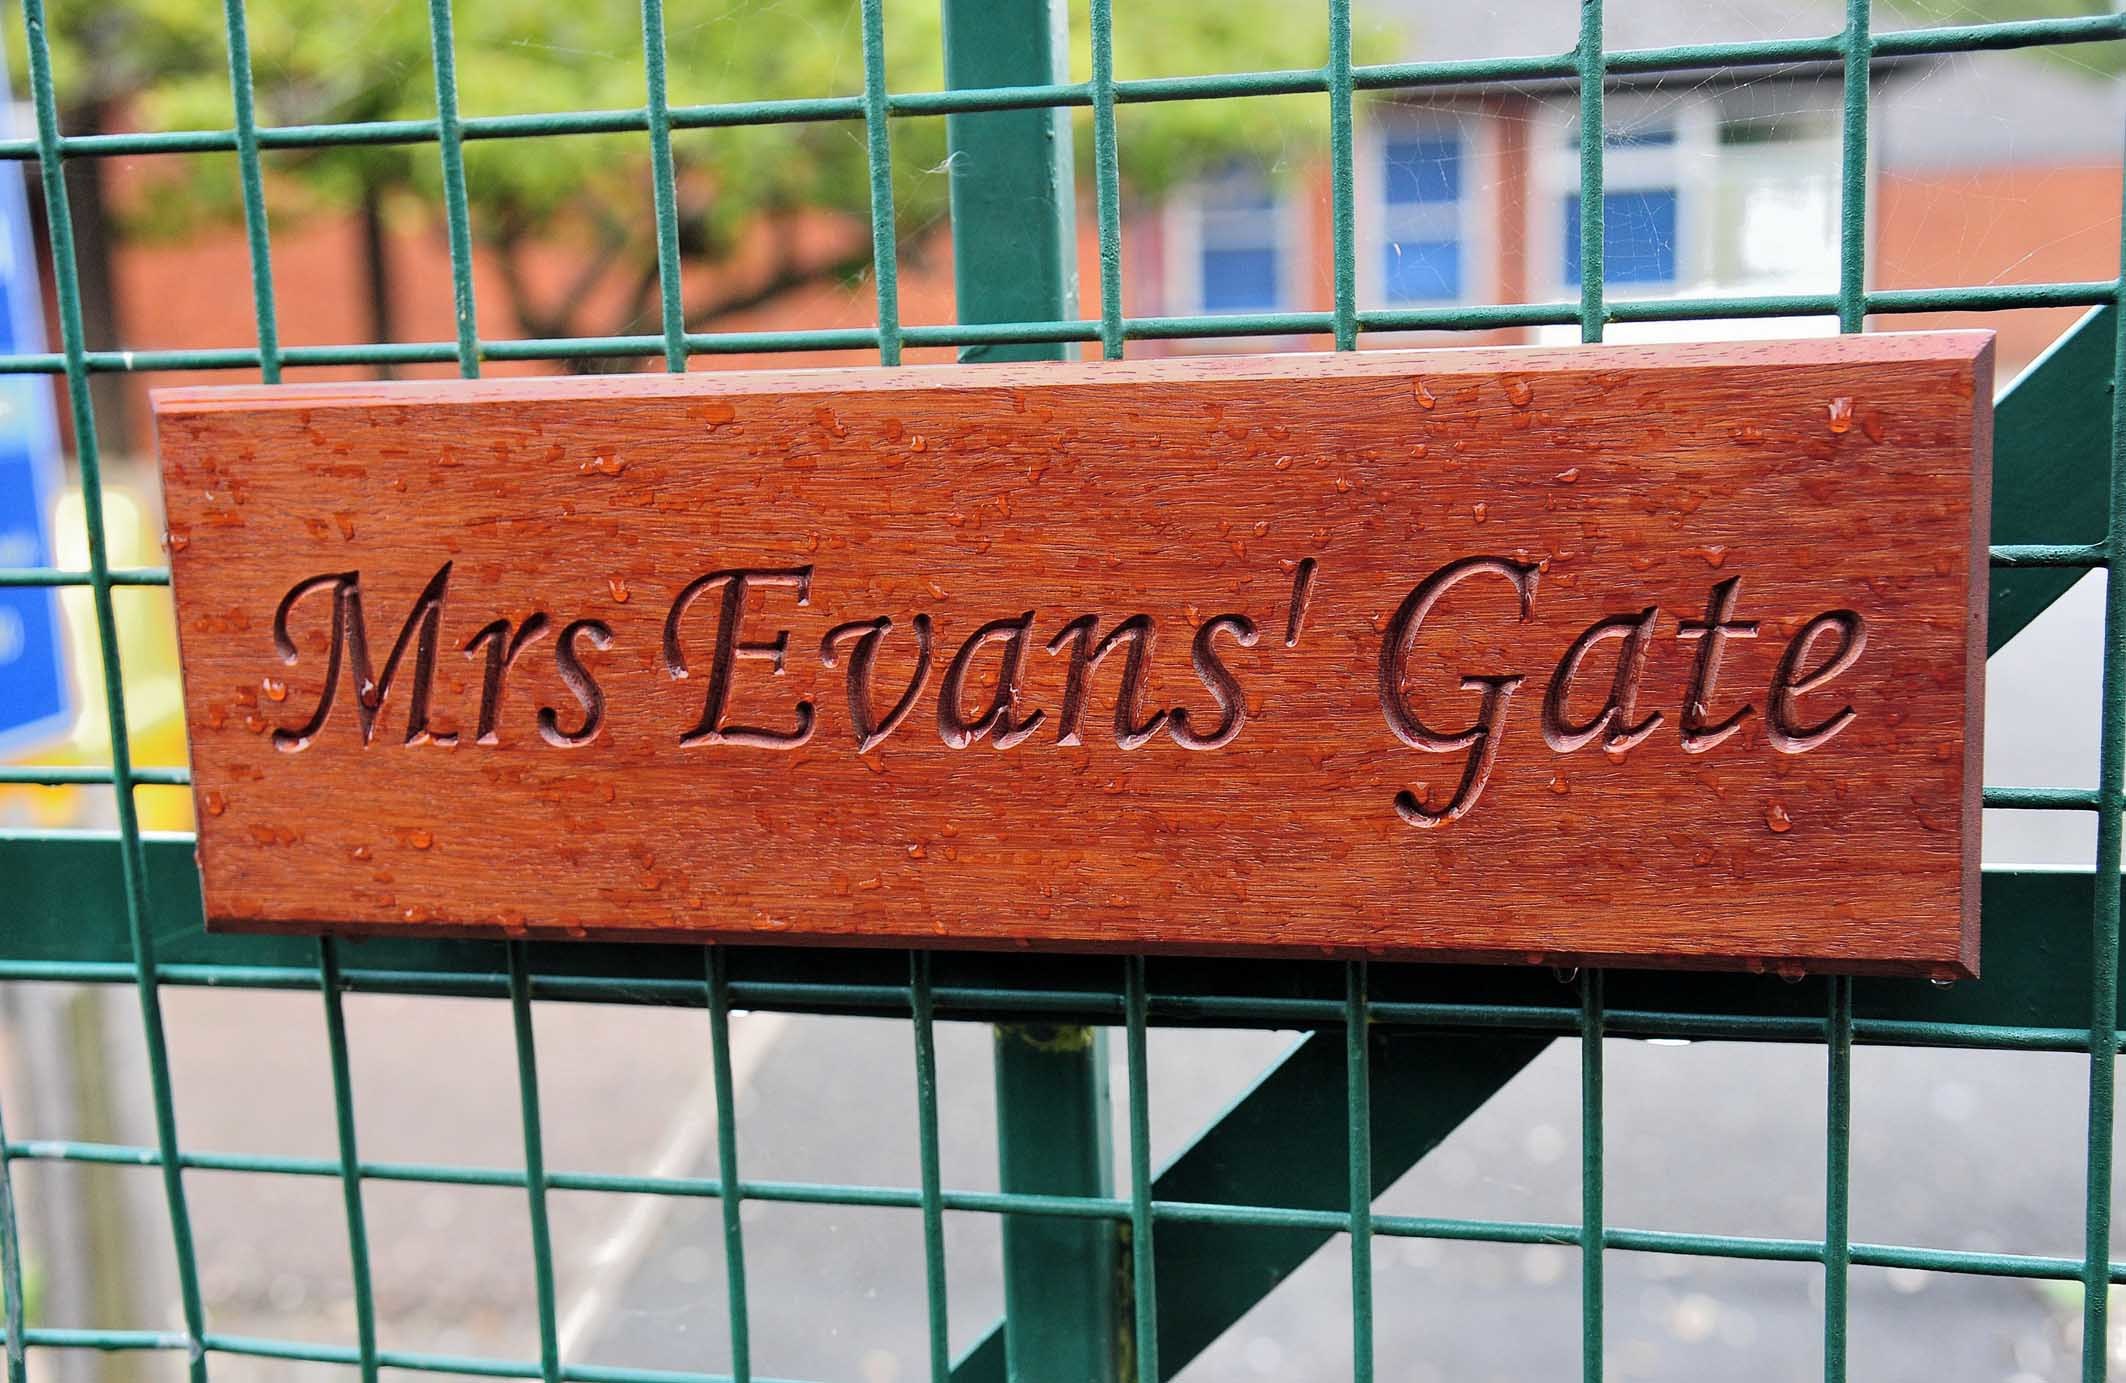 The wooden plaque on the gate at Ledbury Primary School, in memory of former deputy headteach er Jill Evans